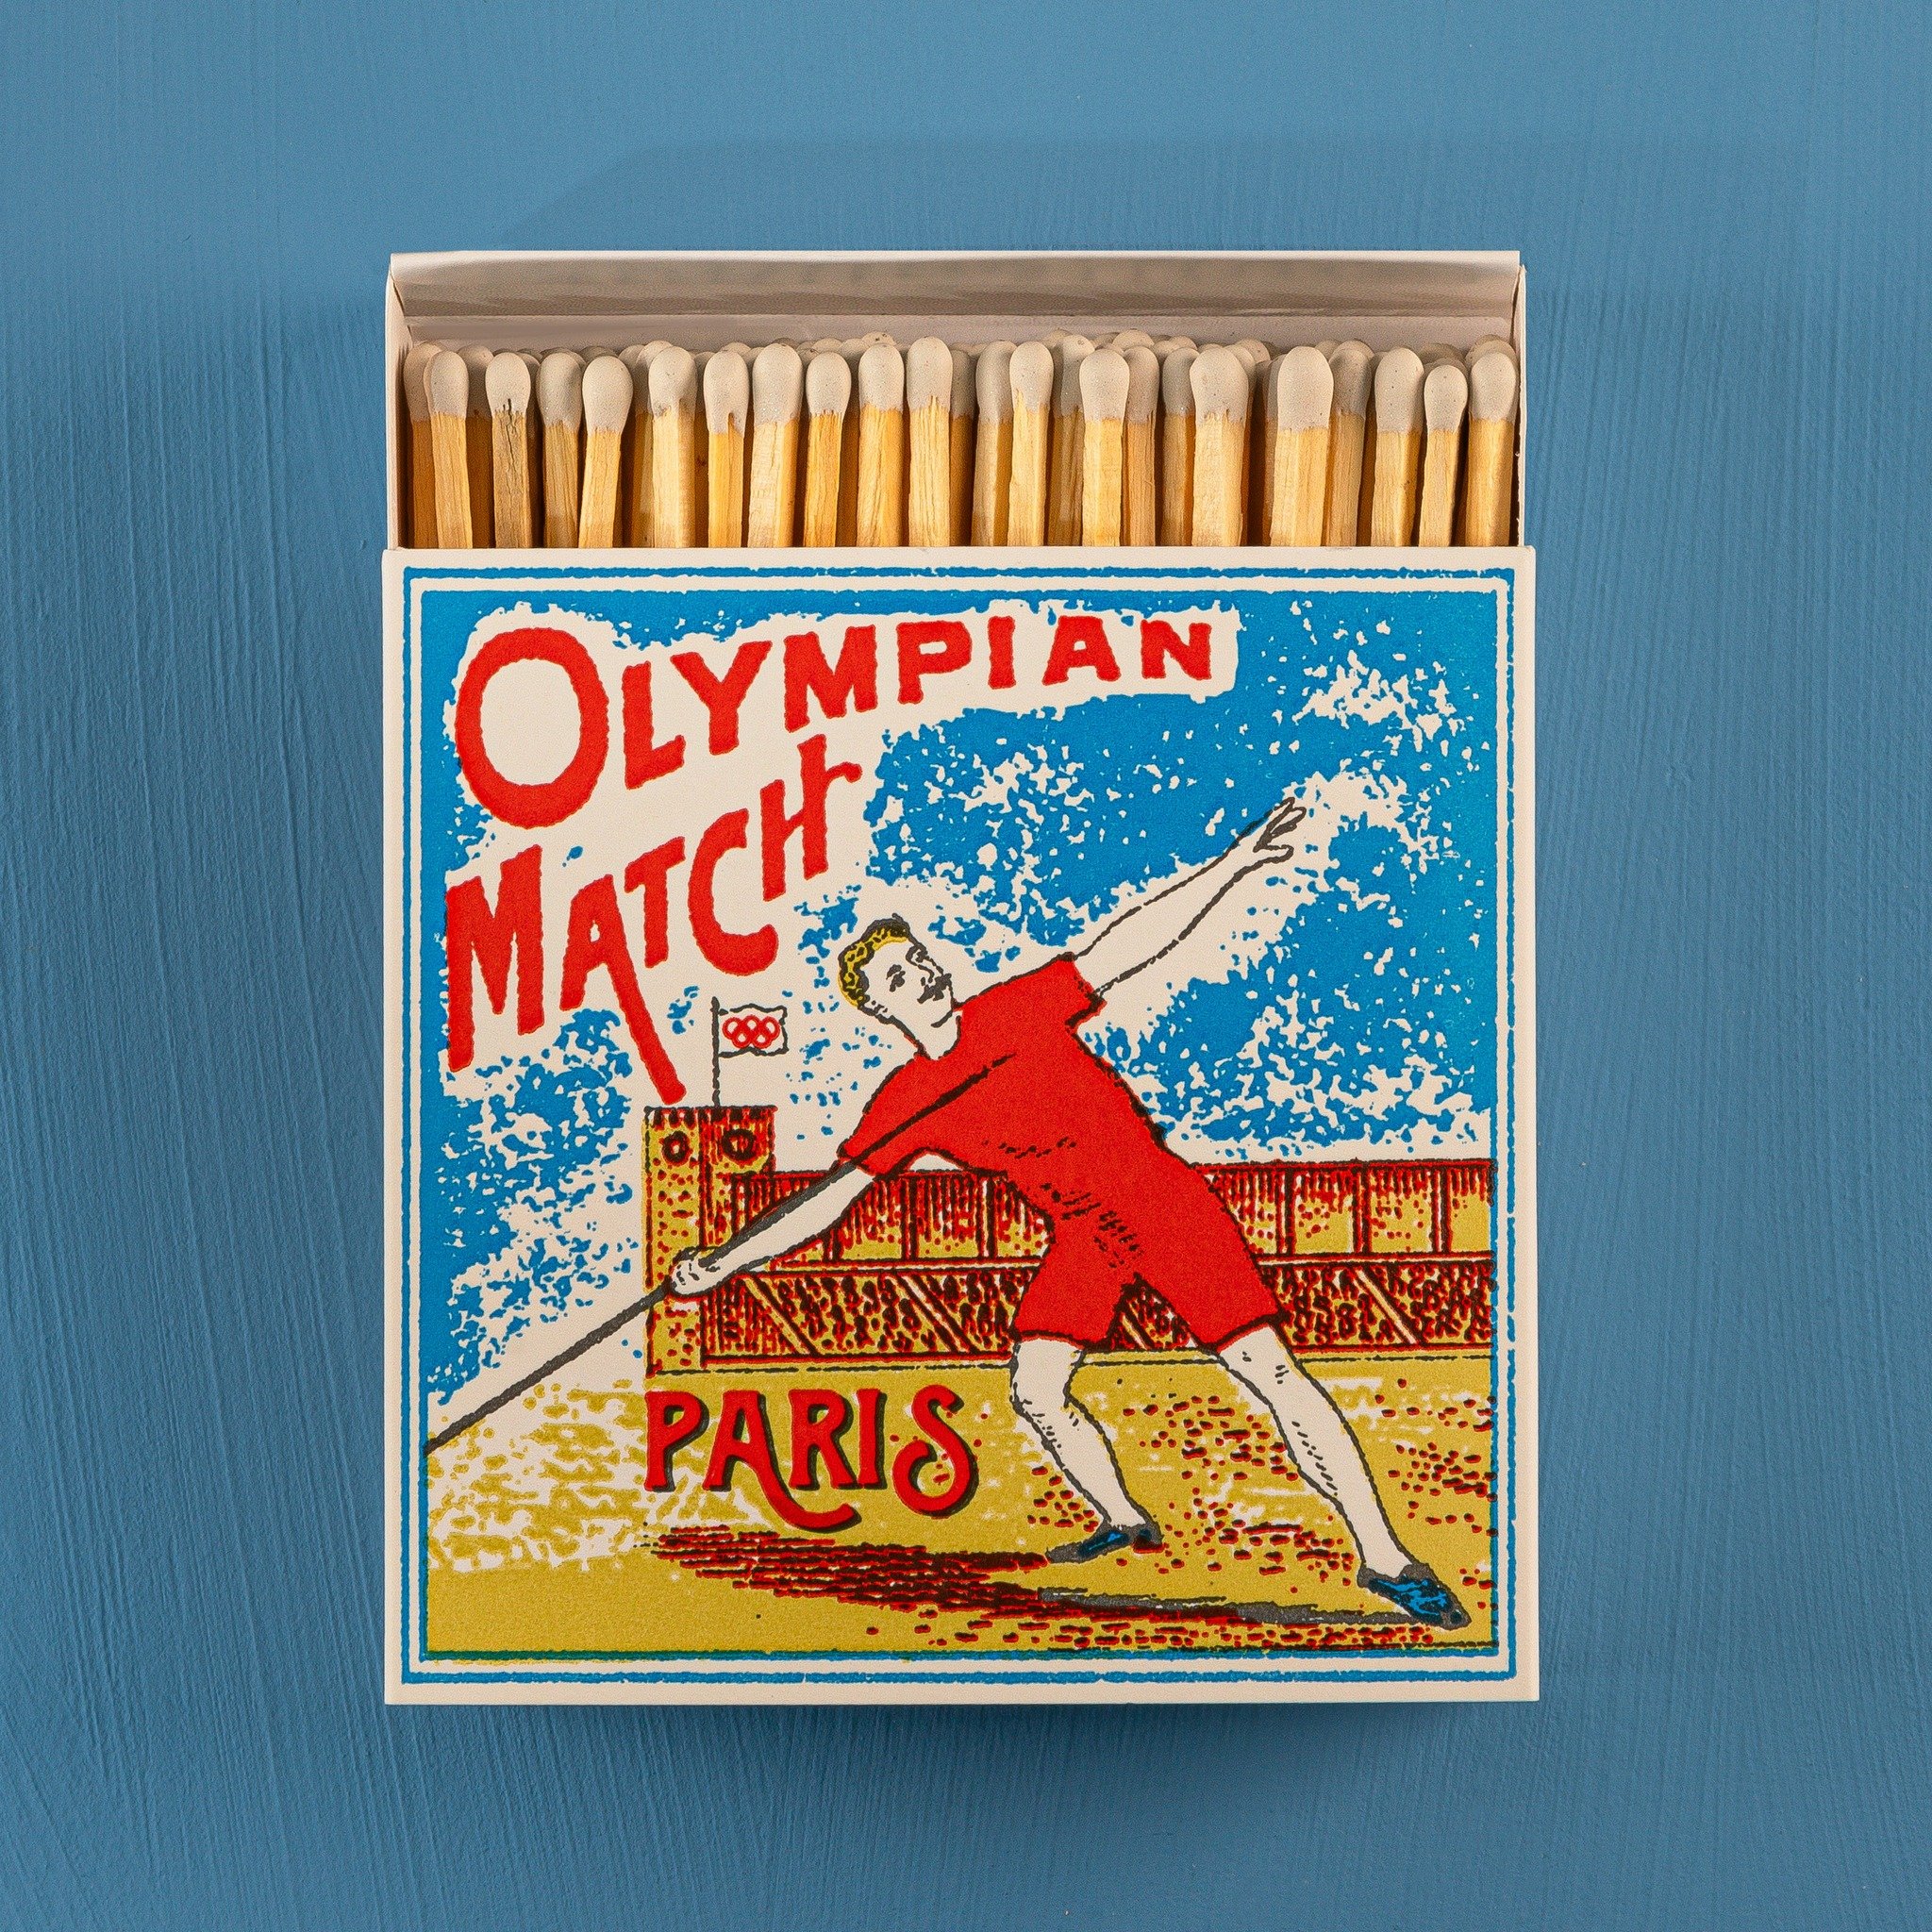 Have you got Olympic fever yet? #paris24 #olympics2024 #teamgb...